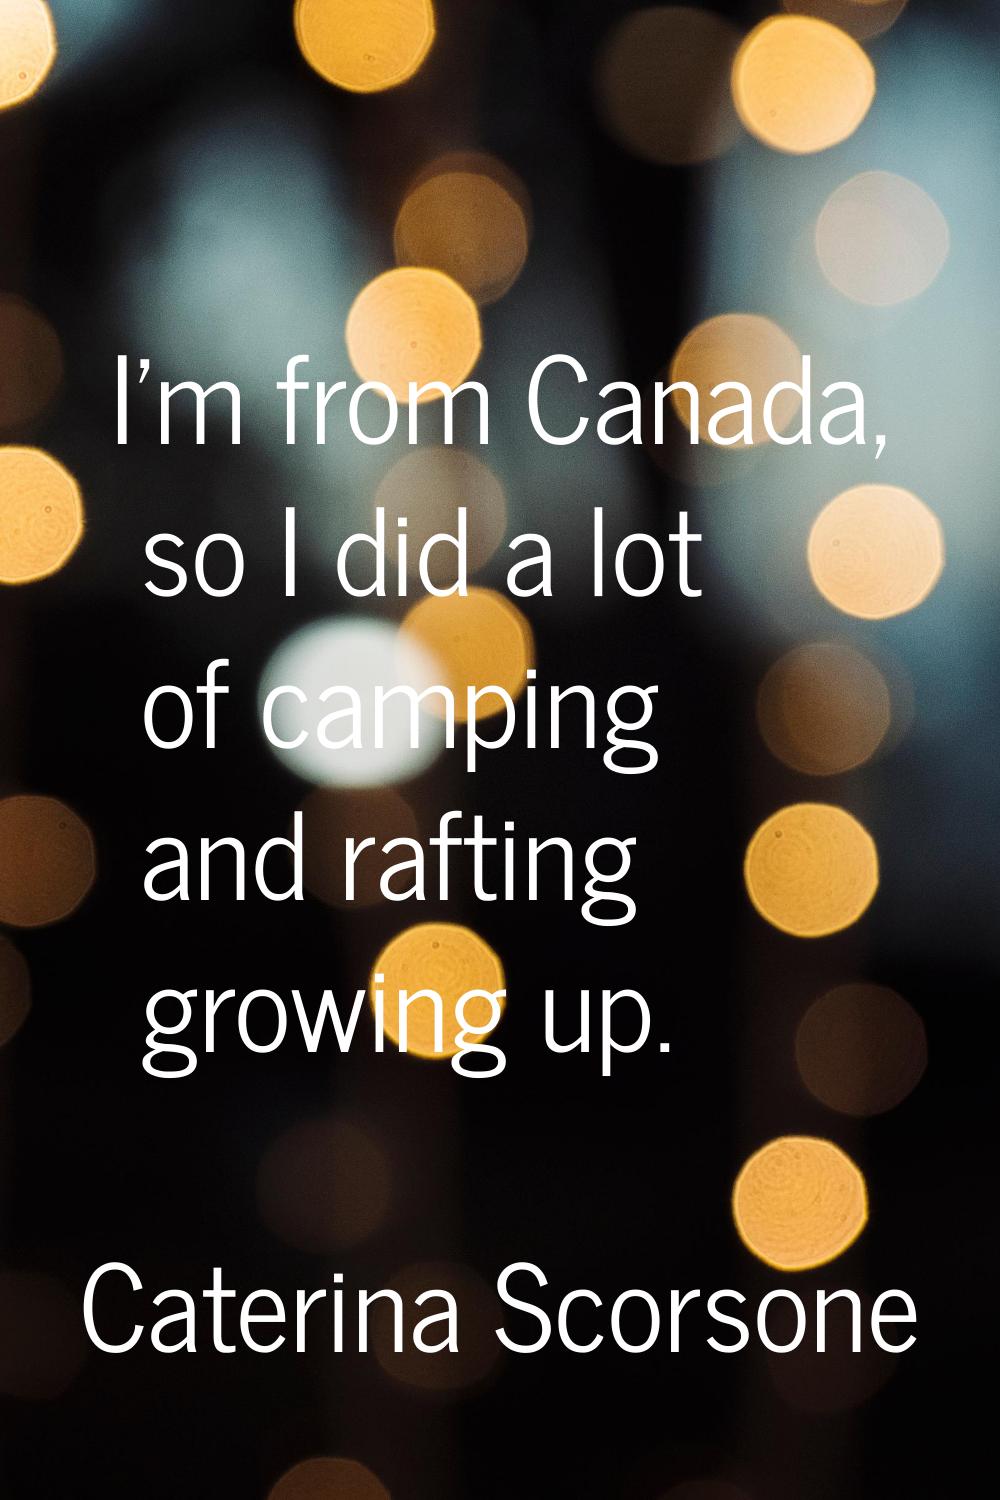 I'm from Canada, so I did a lot of camping and rafting growing up.